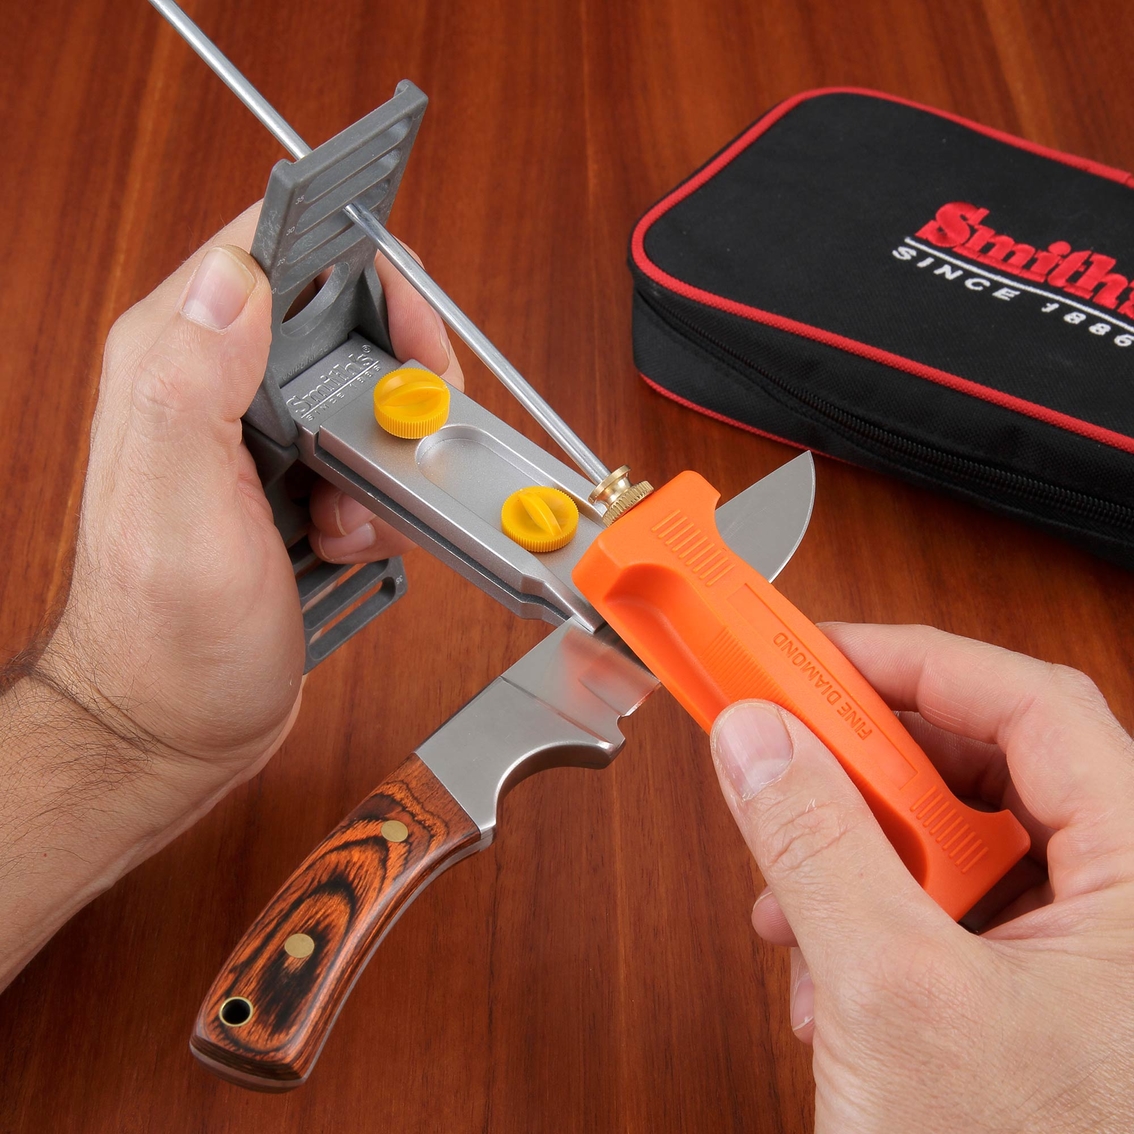 Smith's Consumer Products Store. 3-IN-1 SHARPENING SYSTEM